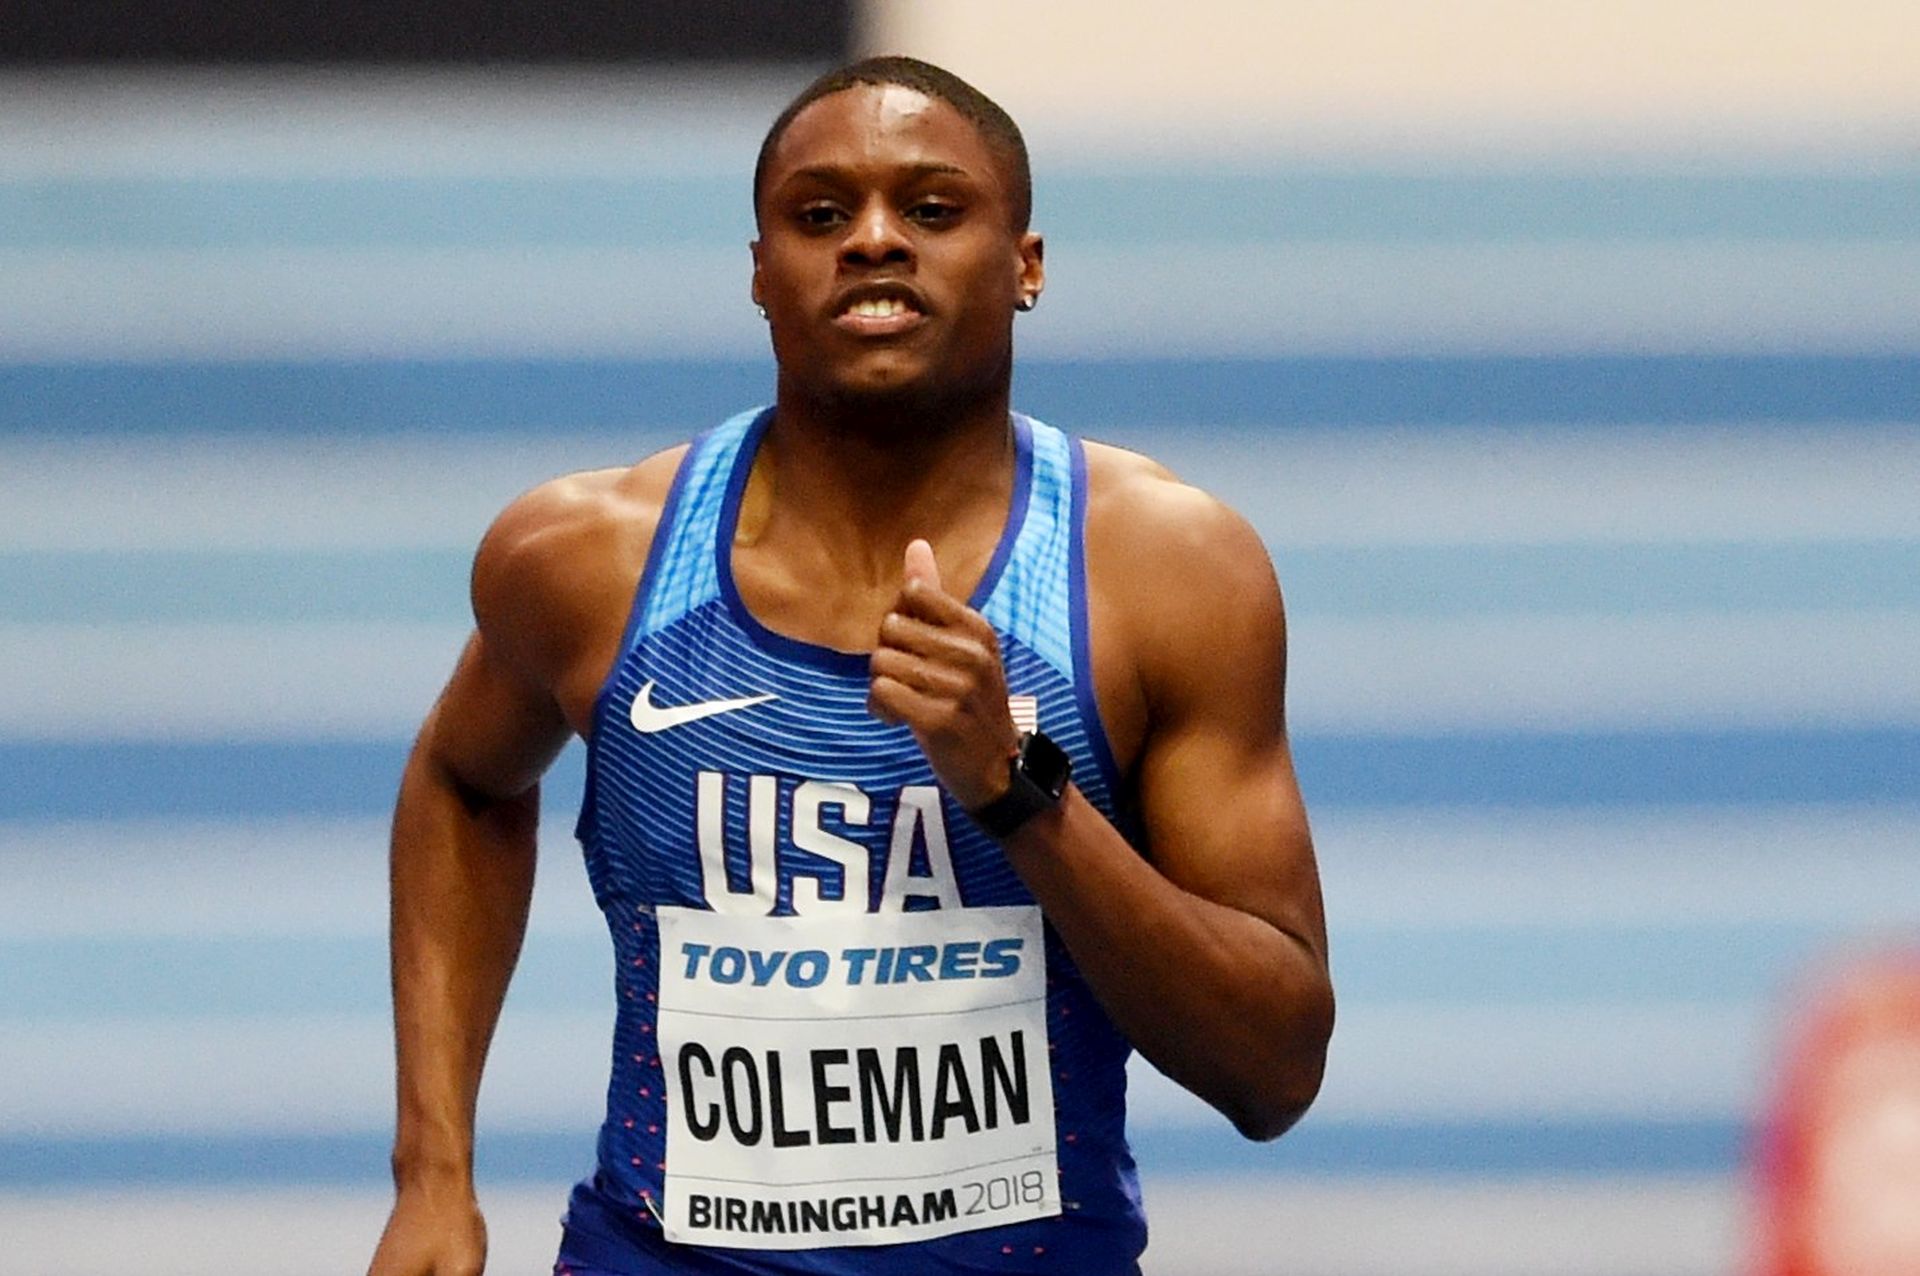 epa06577107 Christian Coleman of the USA in action during the Men's 60 metres heats of the IAAF Athletics World Indoor Championships at Arena Birmingham, Britain, 03 March 2018.  EPA/FACUNDO ARRIZABALAGA